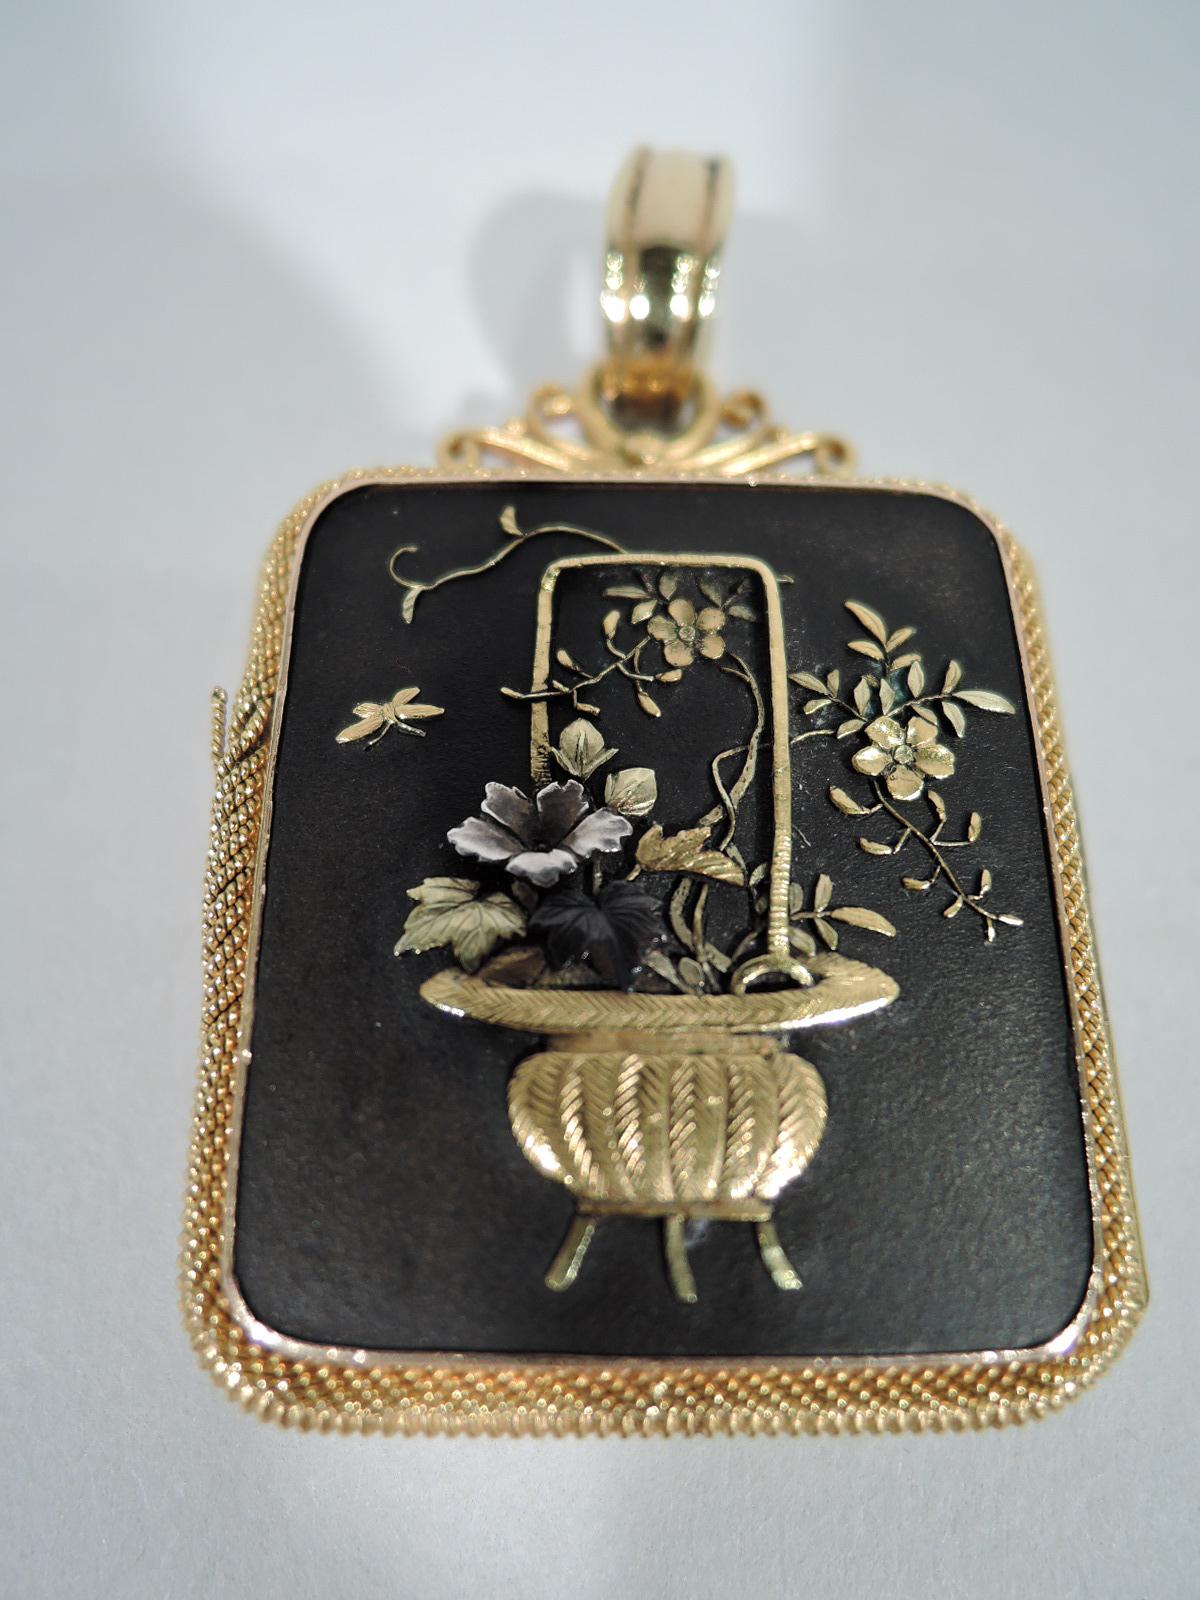 Fabulous Meiji shakudo locket with delicate gold braid border. Rectangular with gold and silver applied to shakudo ground. (Shakudo is a lacquer-shaded alloy.) One side are peacock and bamboo with Mount Fuji in background. On other is flower basket.